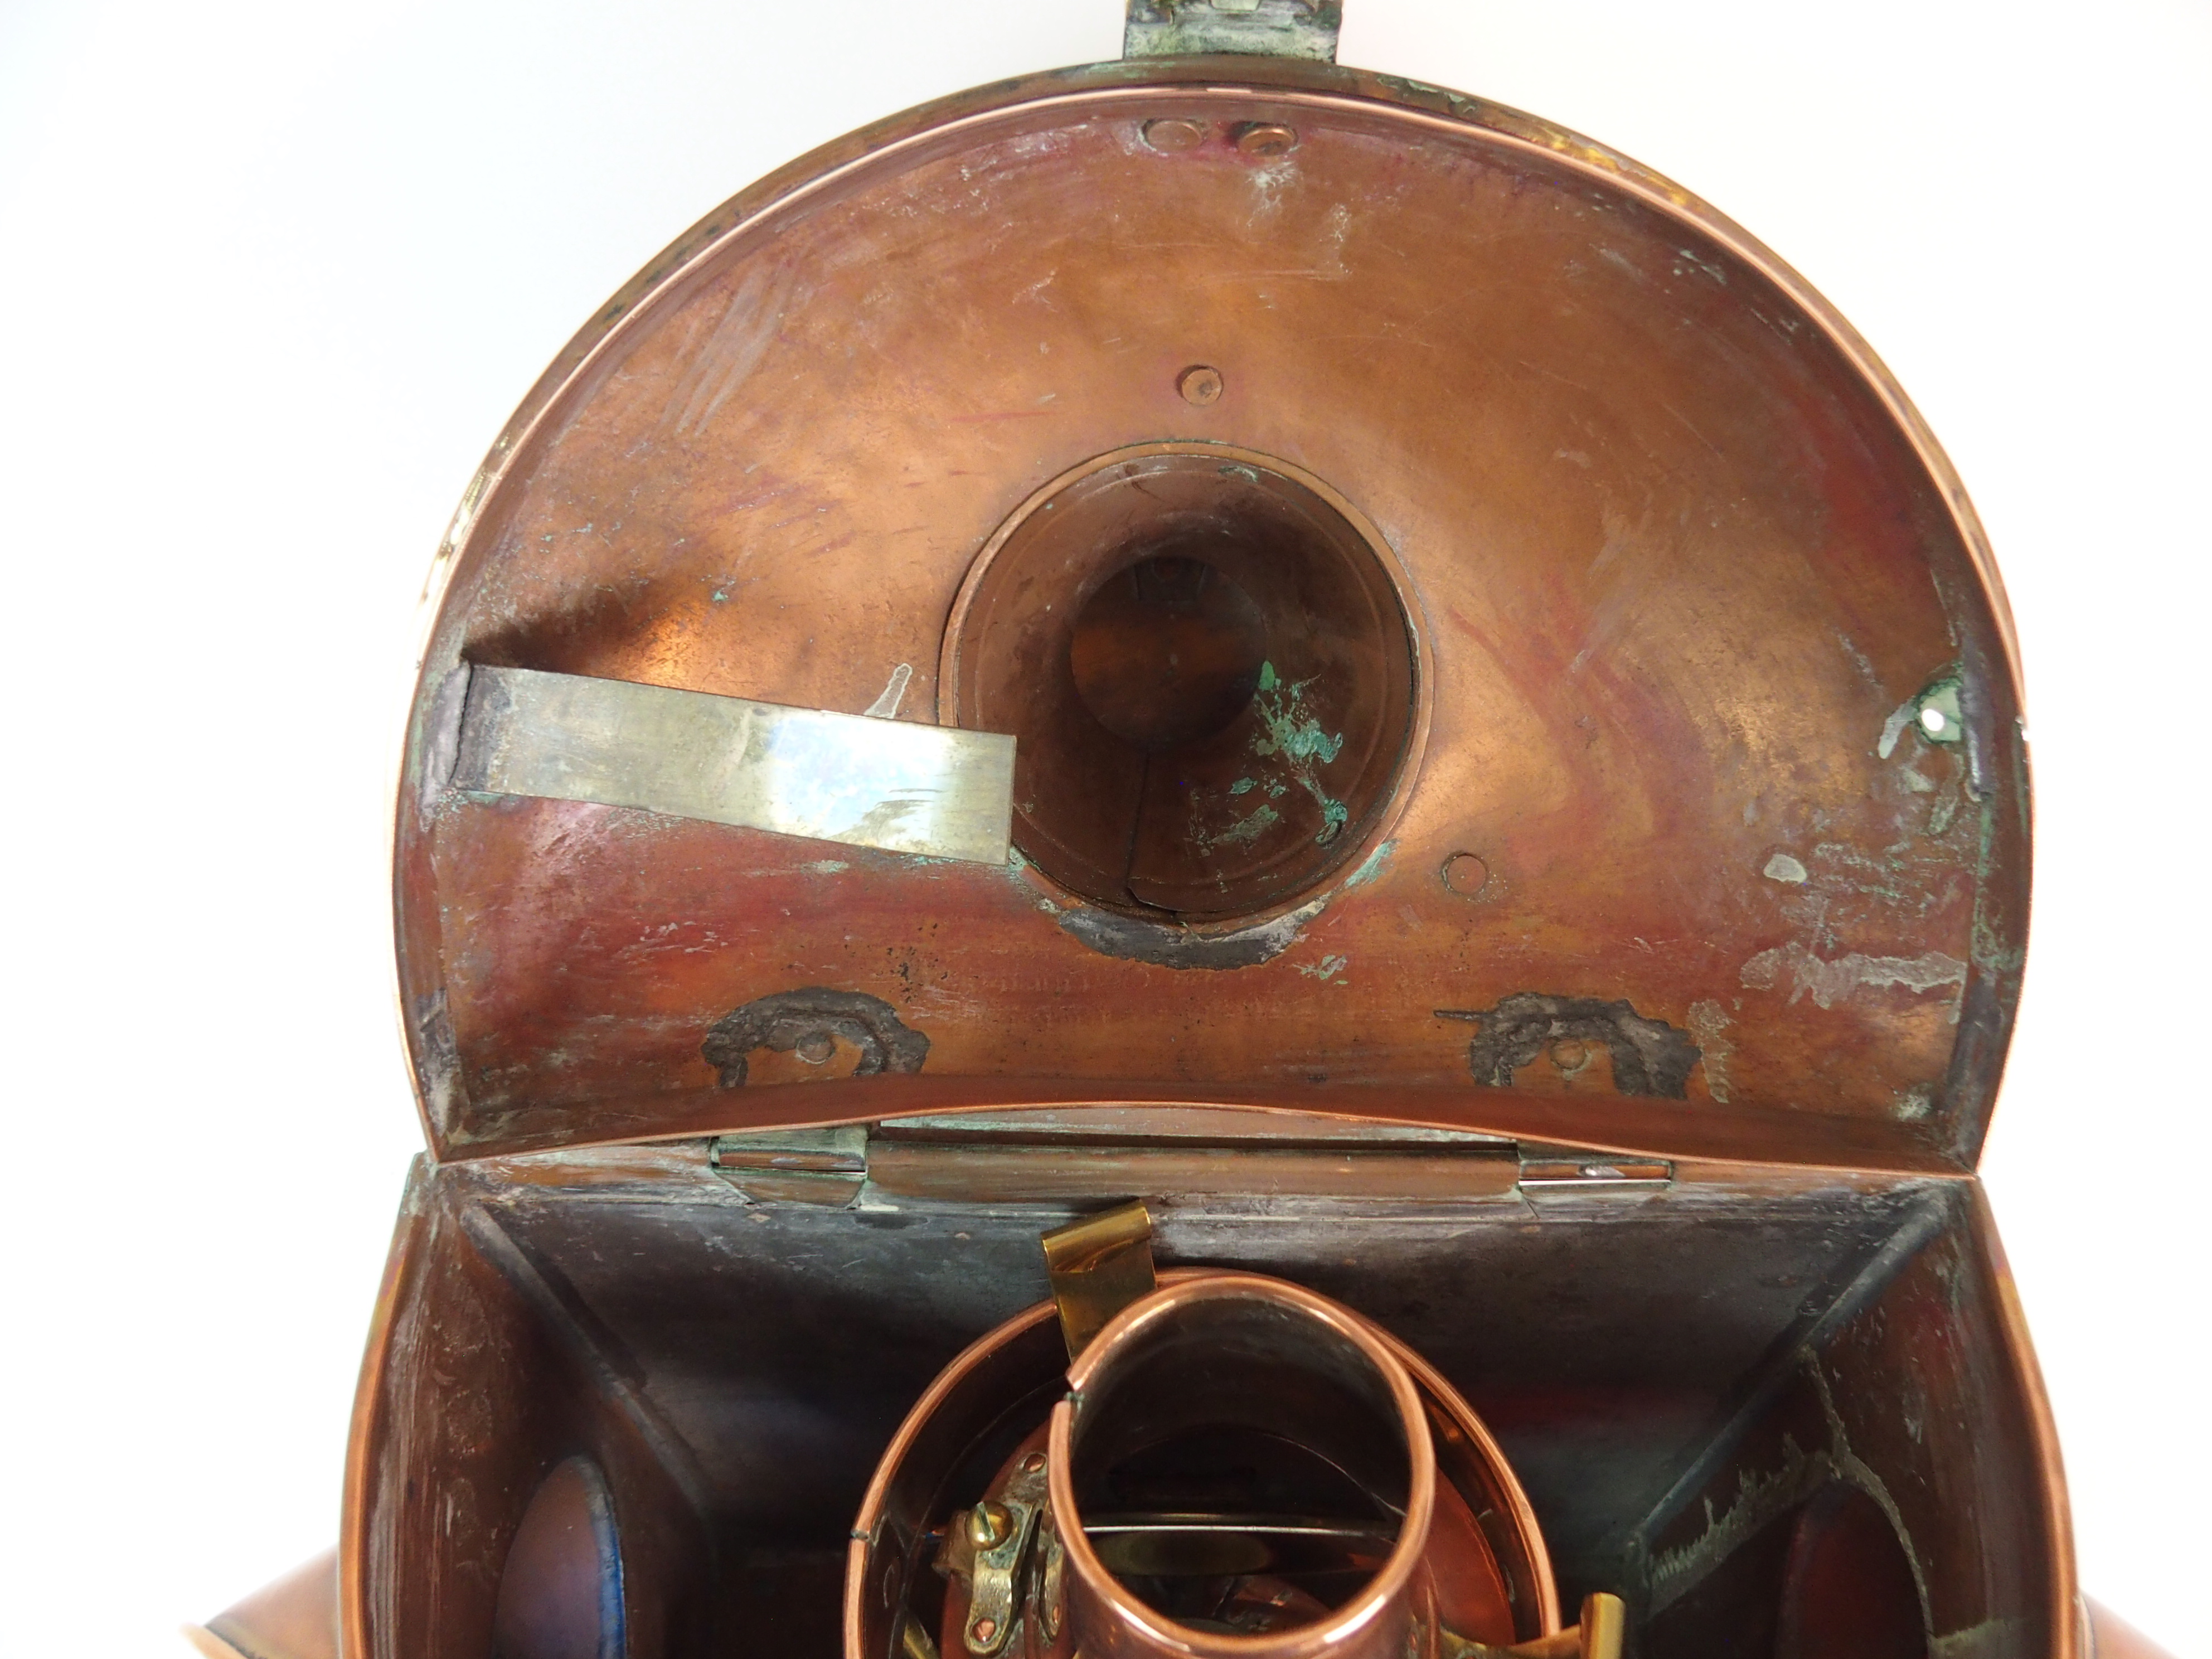 A VICTORIAN COPPER PORT & STARBOARD SHIPS LANTERN with hinged top and swing handle, with interior - Image 8 of 10